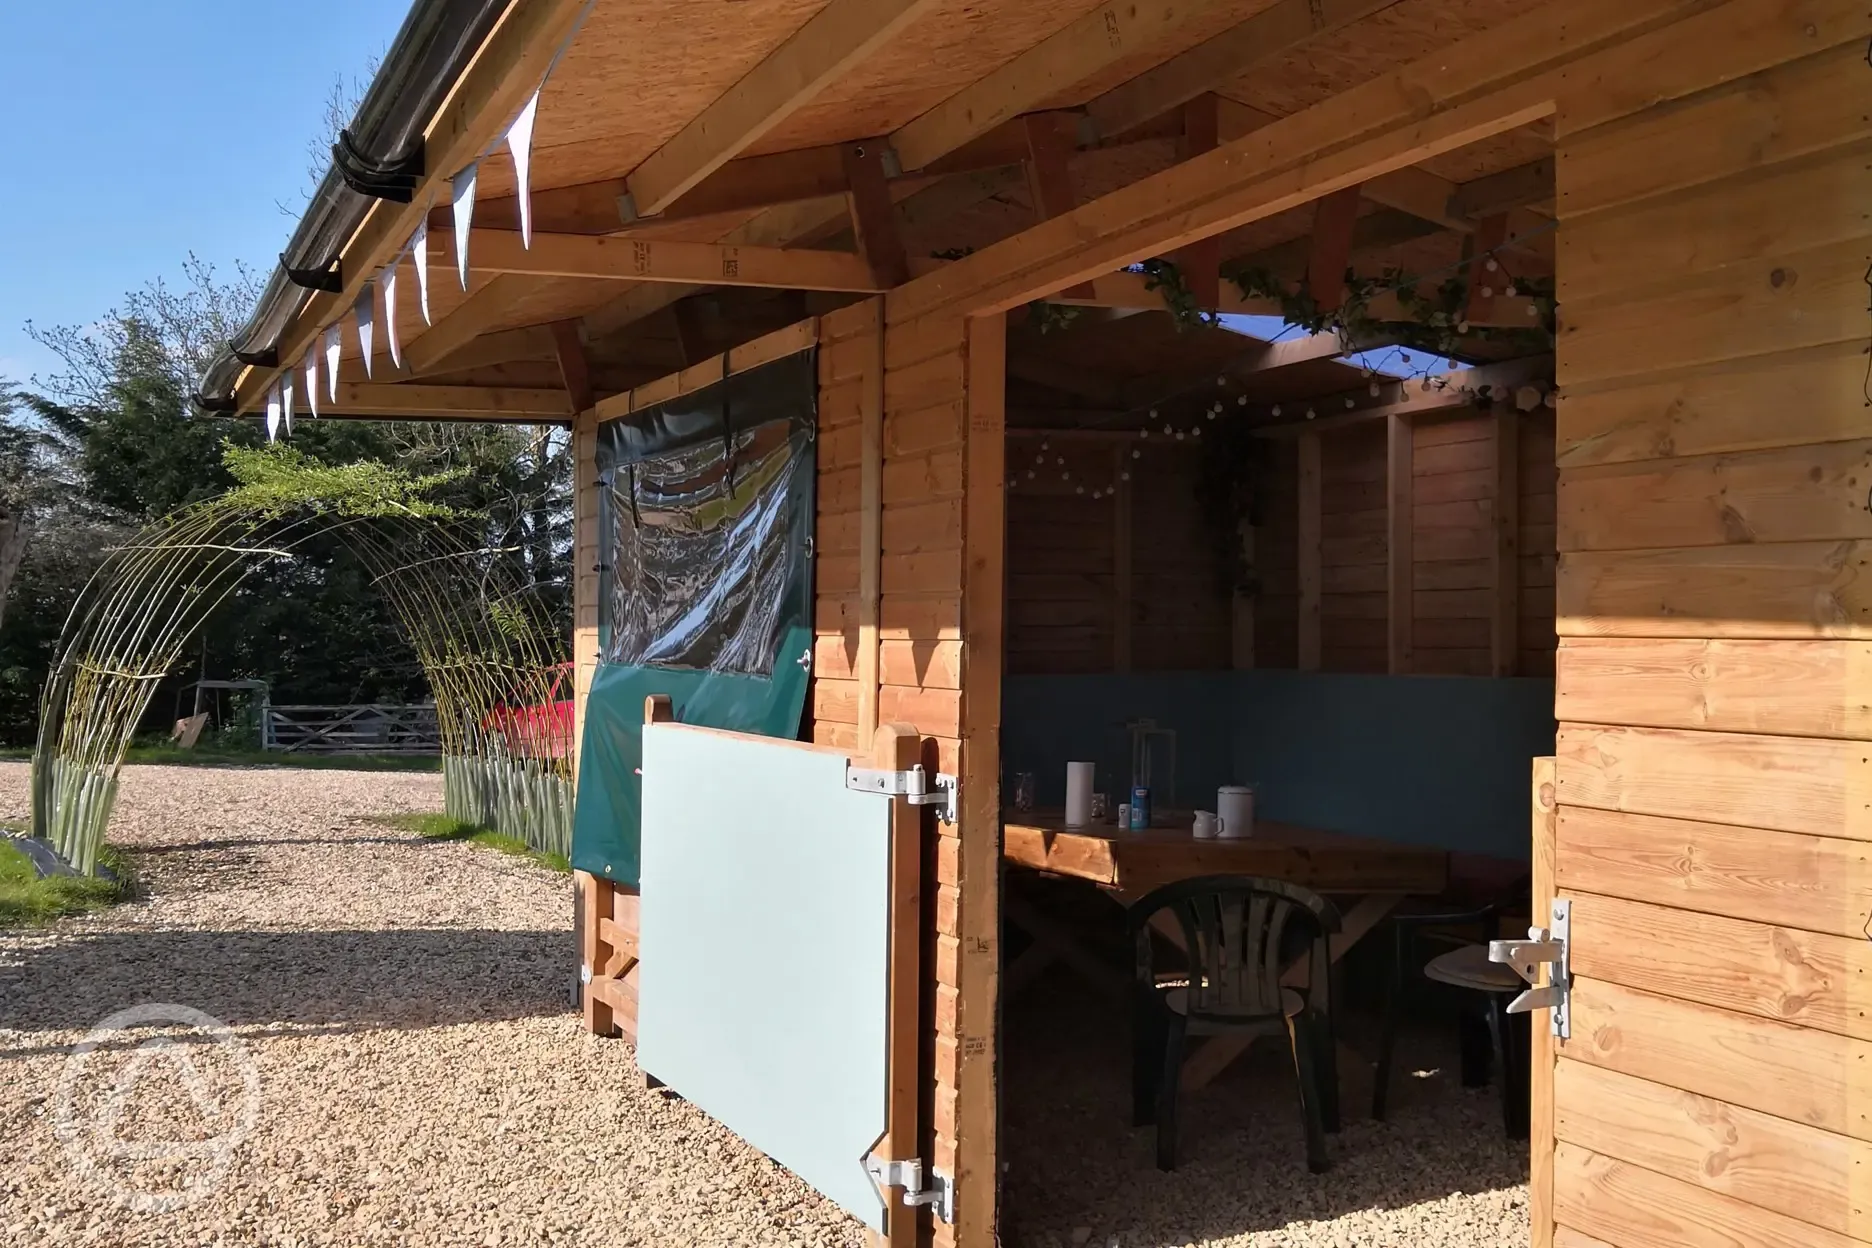 Campden Yurts' timber shelter for guests to eat or play games in